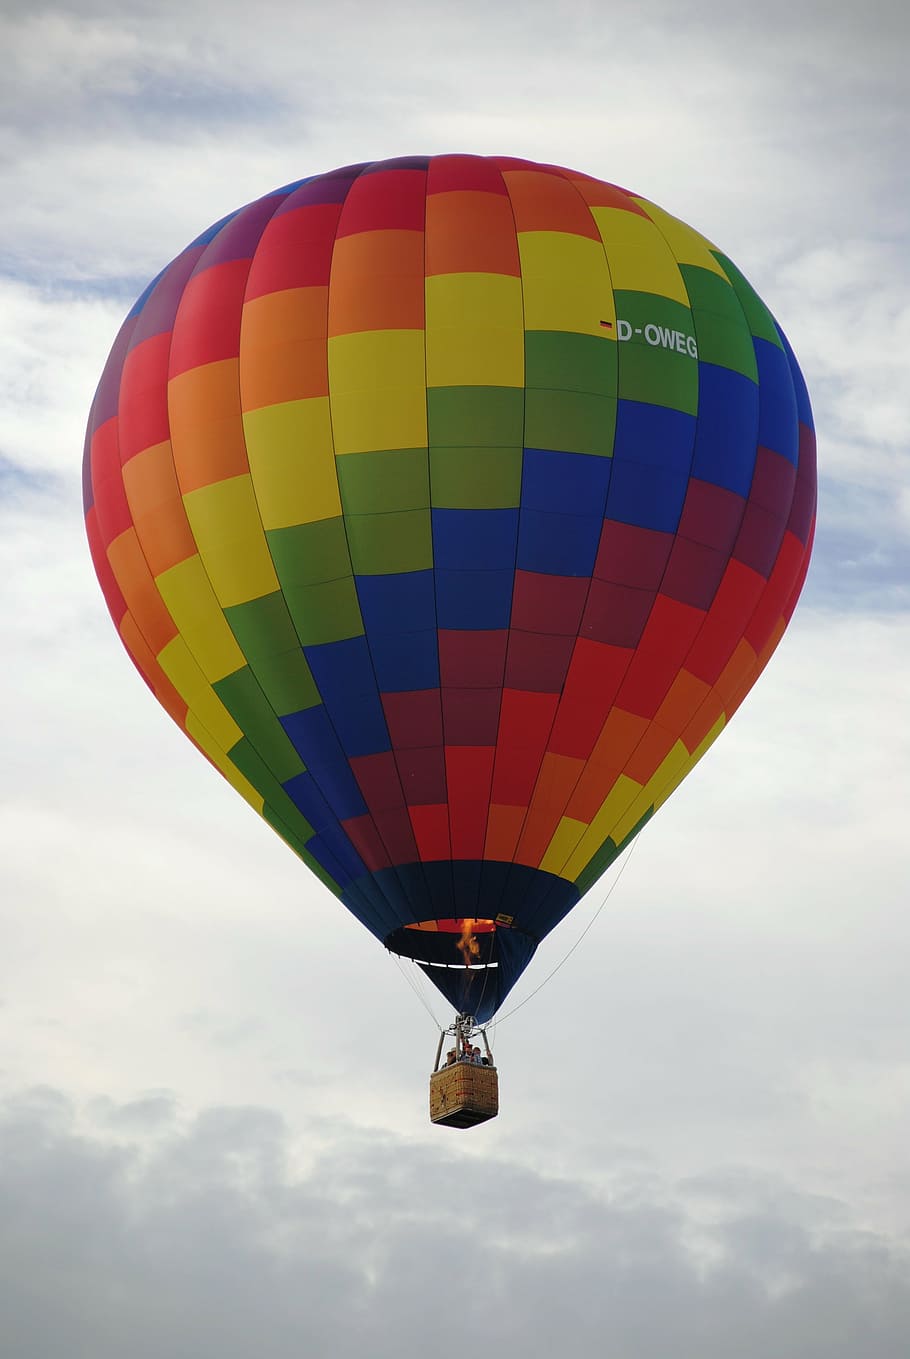 floating multicolored hot-air balloon under gray sky during daytime